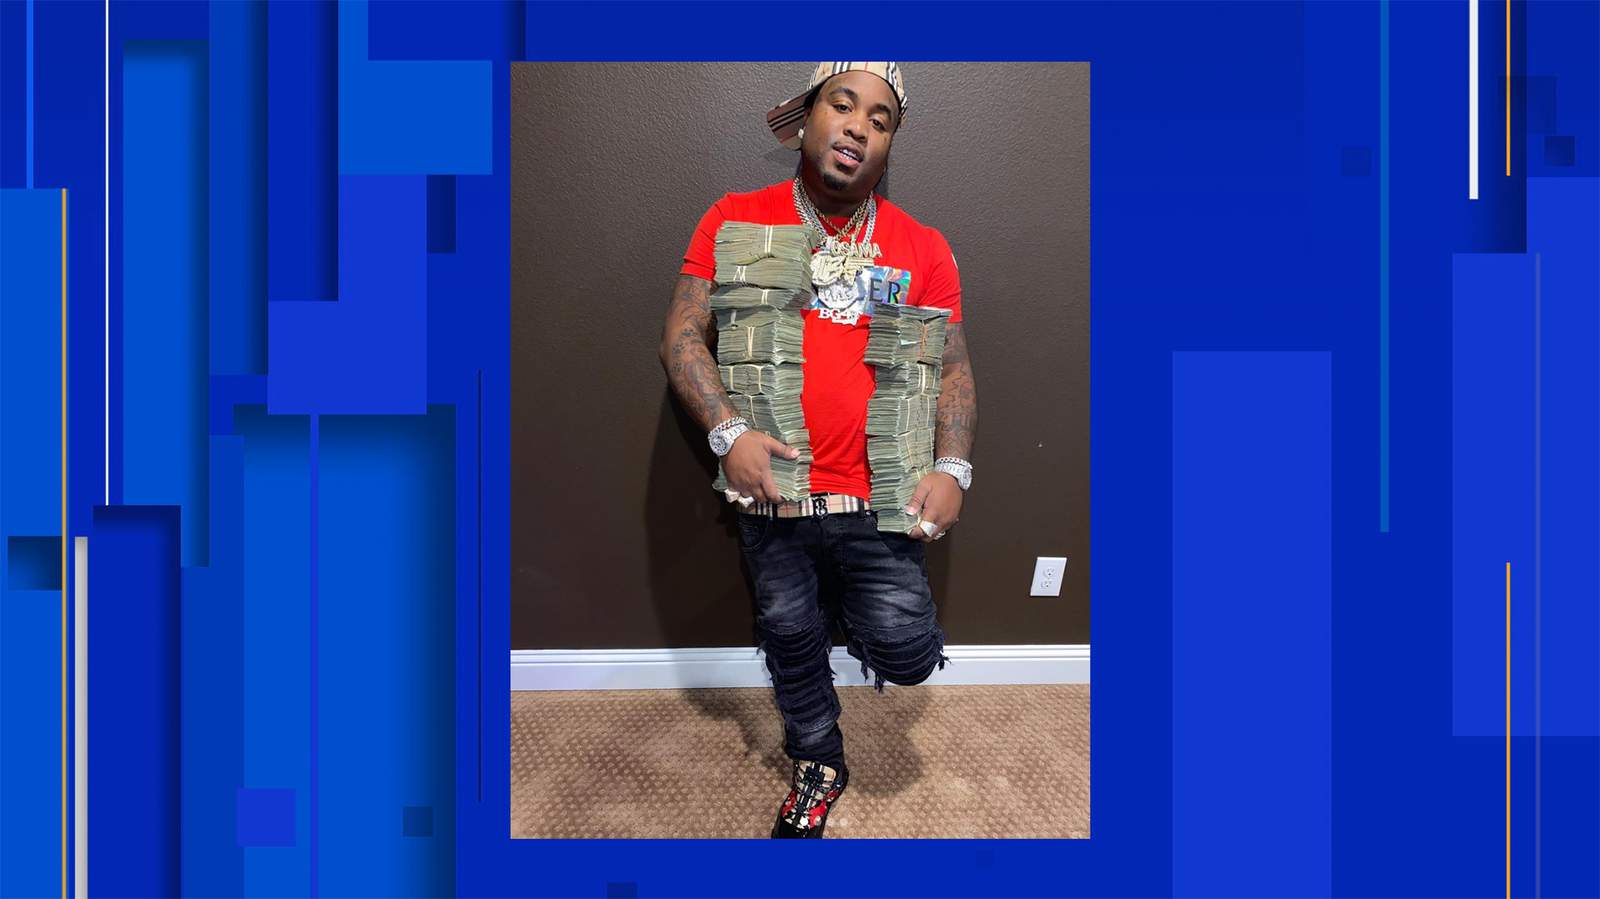 Dallas rapper Mo3 is reported to have been killed in a Dallas freeway shooting